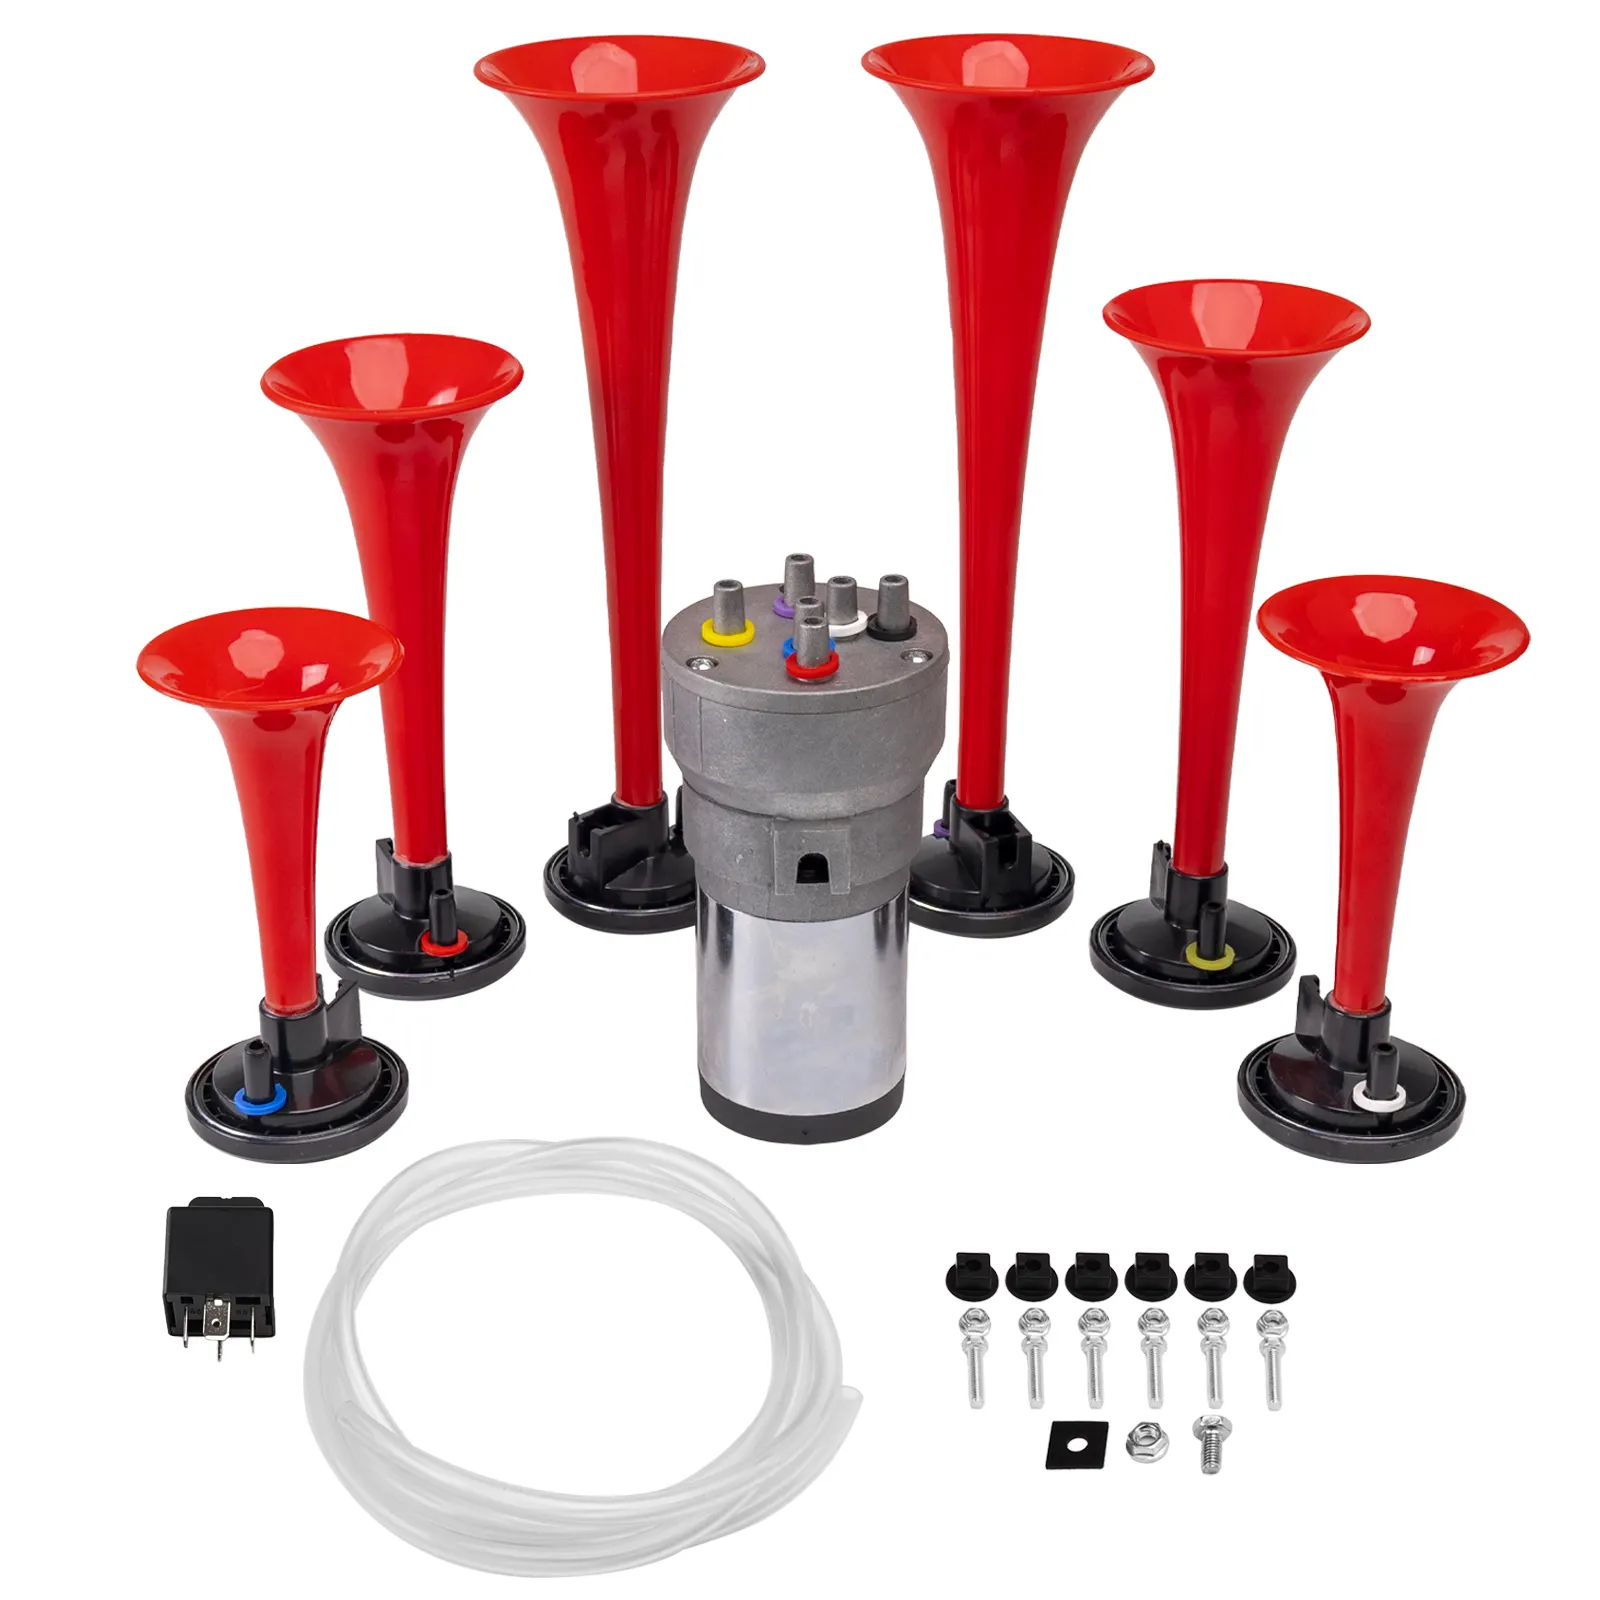 C- FARBIN Musical Air Horns Plays Godfather Melody Music Horn Multi-frequency Sound Six Trumpet Truck Horn Plastic 12V